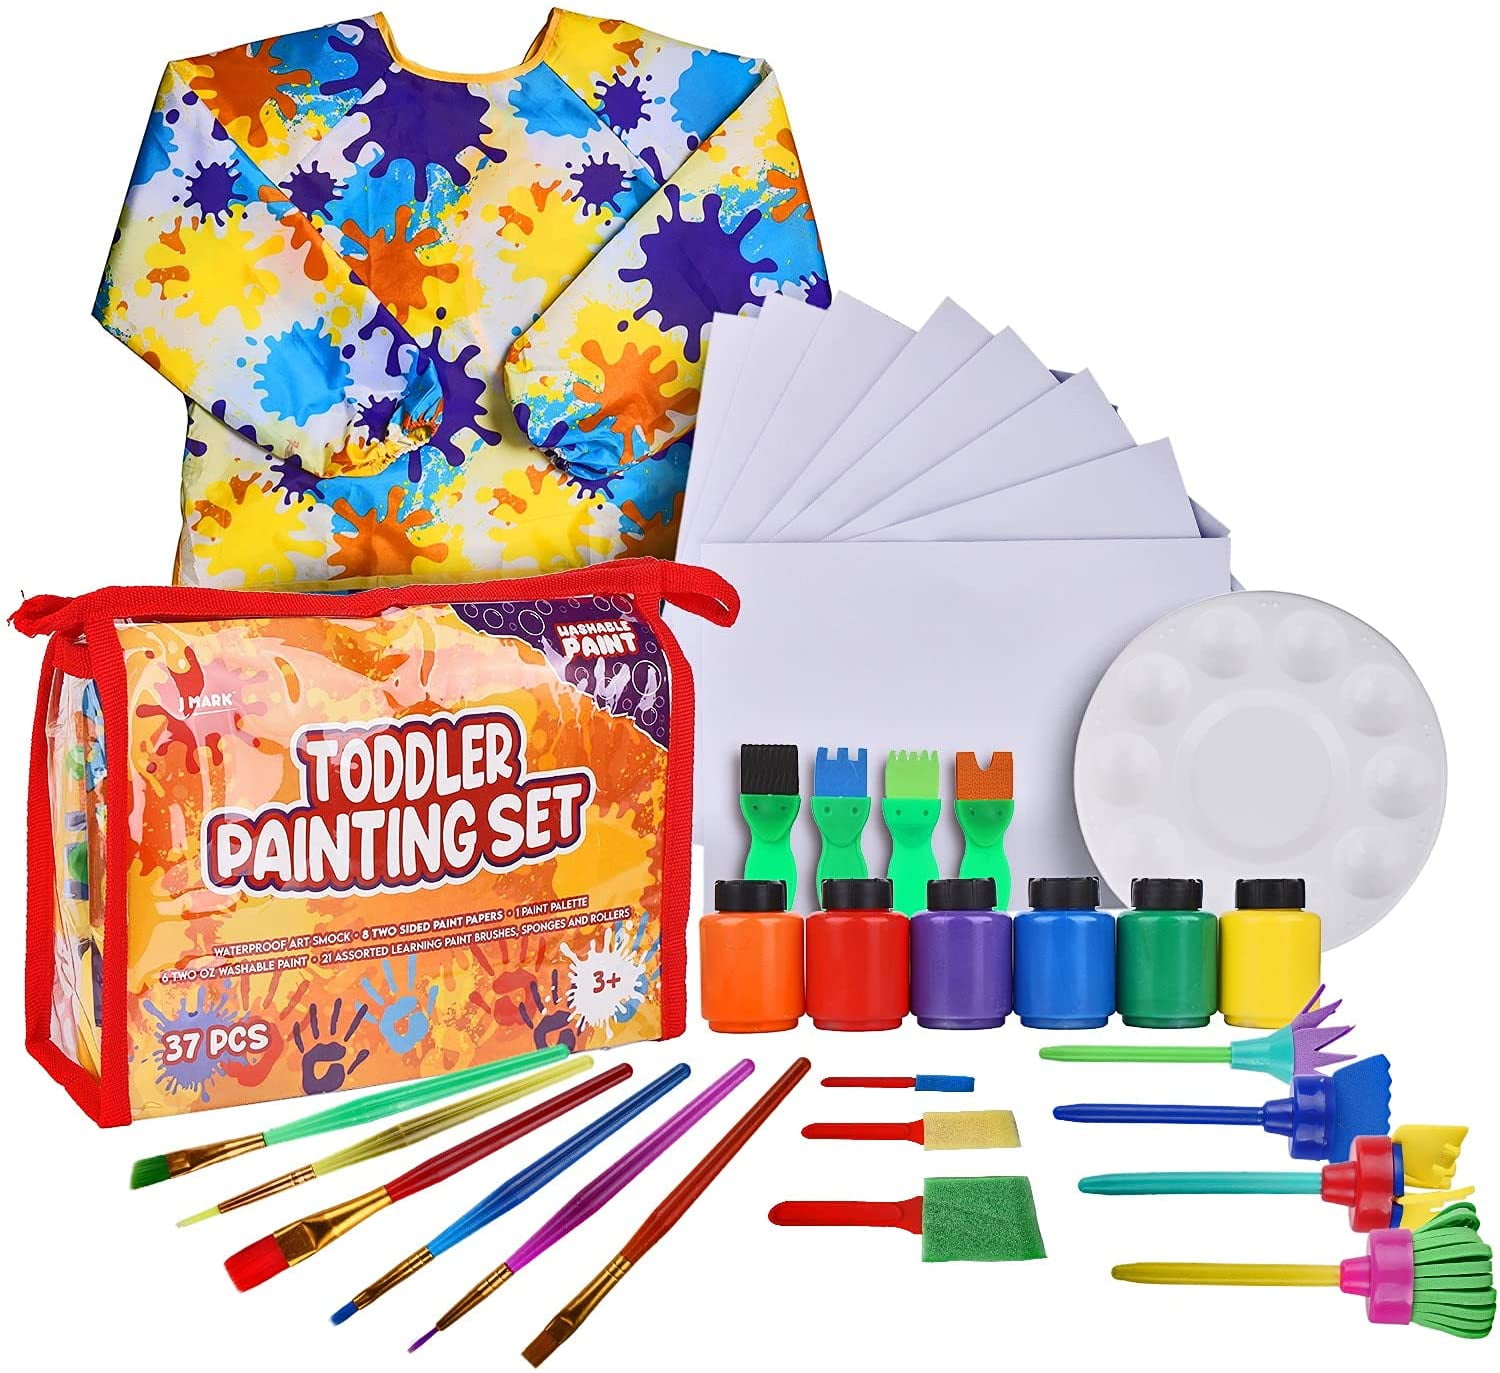 MEEDEN Kids Painting Set, Acrylic Paint Set for Kids, Art Supplies Kit with Toddler Paint Brushes, Painting Smock, 12 Colors Non-Toxic Acrylic